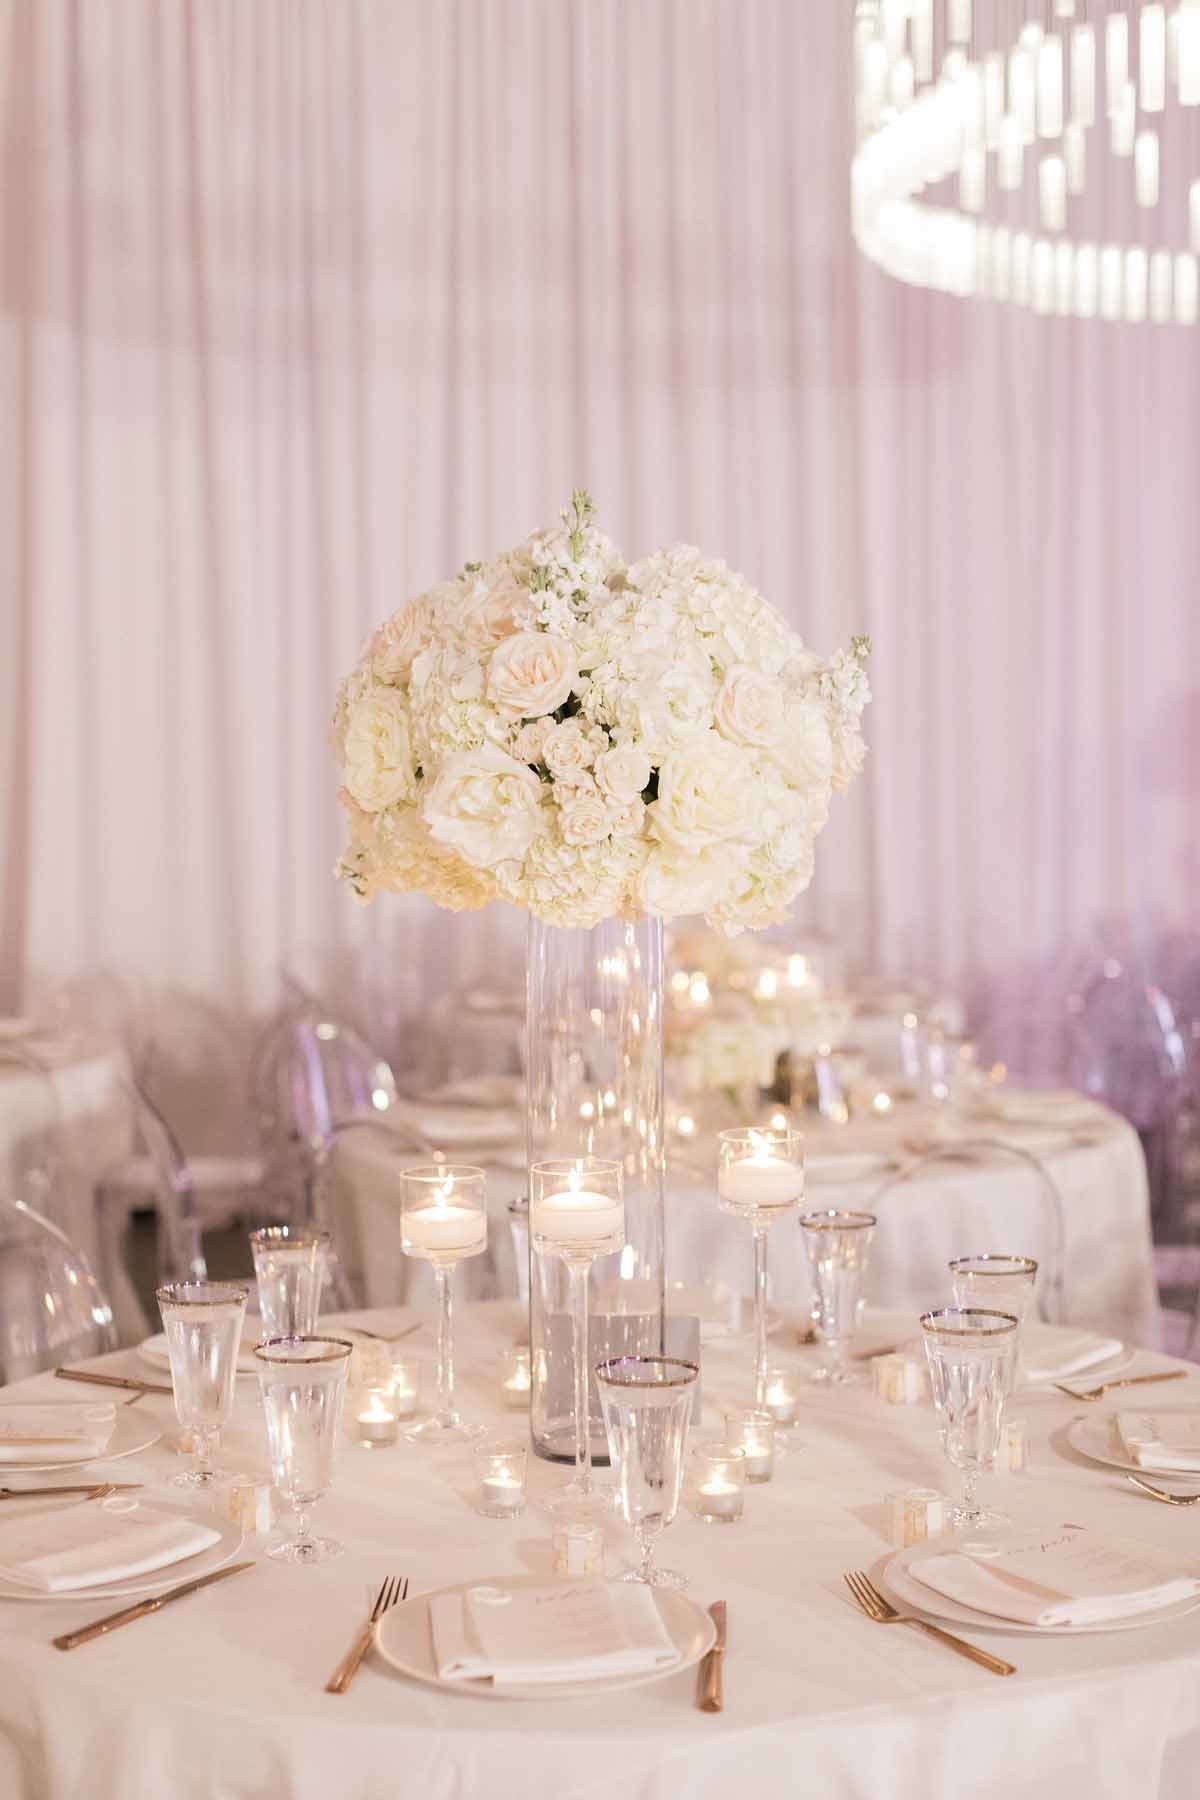 Elevated arrangement of all white roses and hydrangea seem to float in this all white space